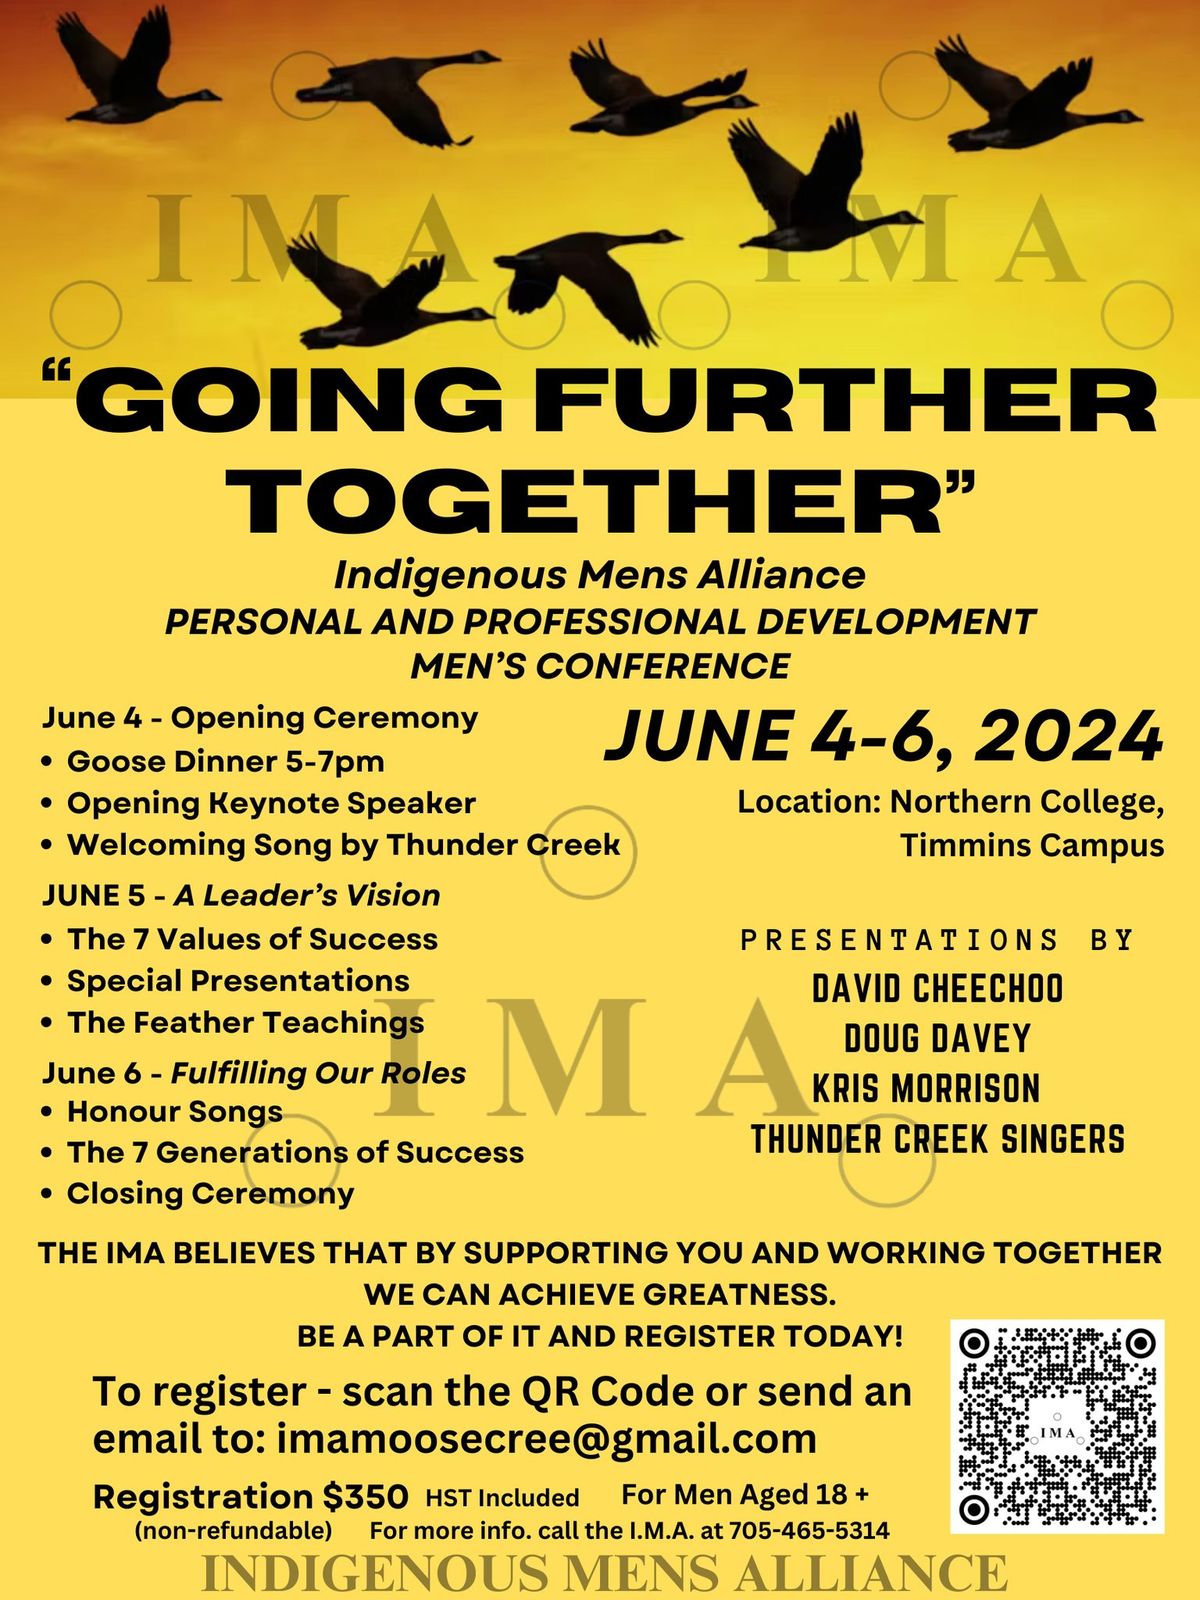 THE "GOING FURTHER TOGETHER" MENS CONFERENCE 